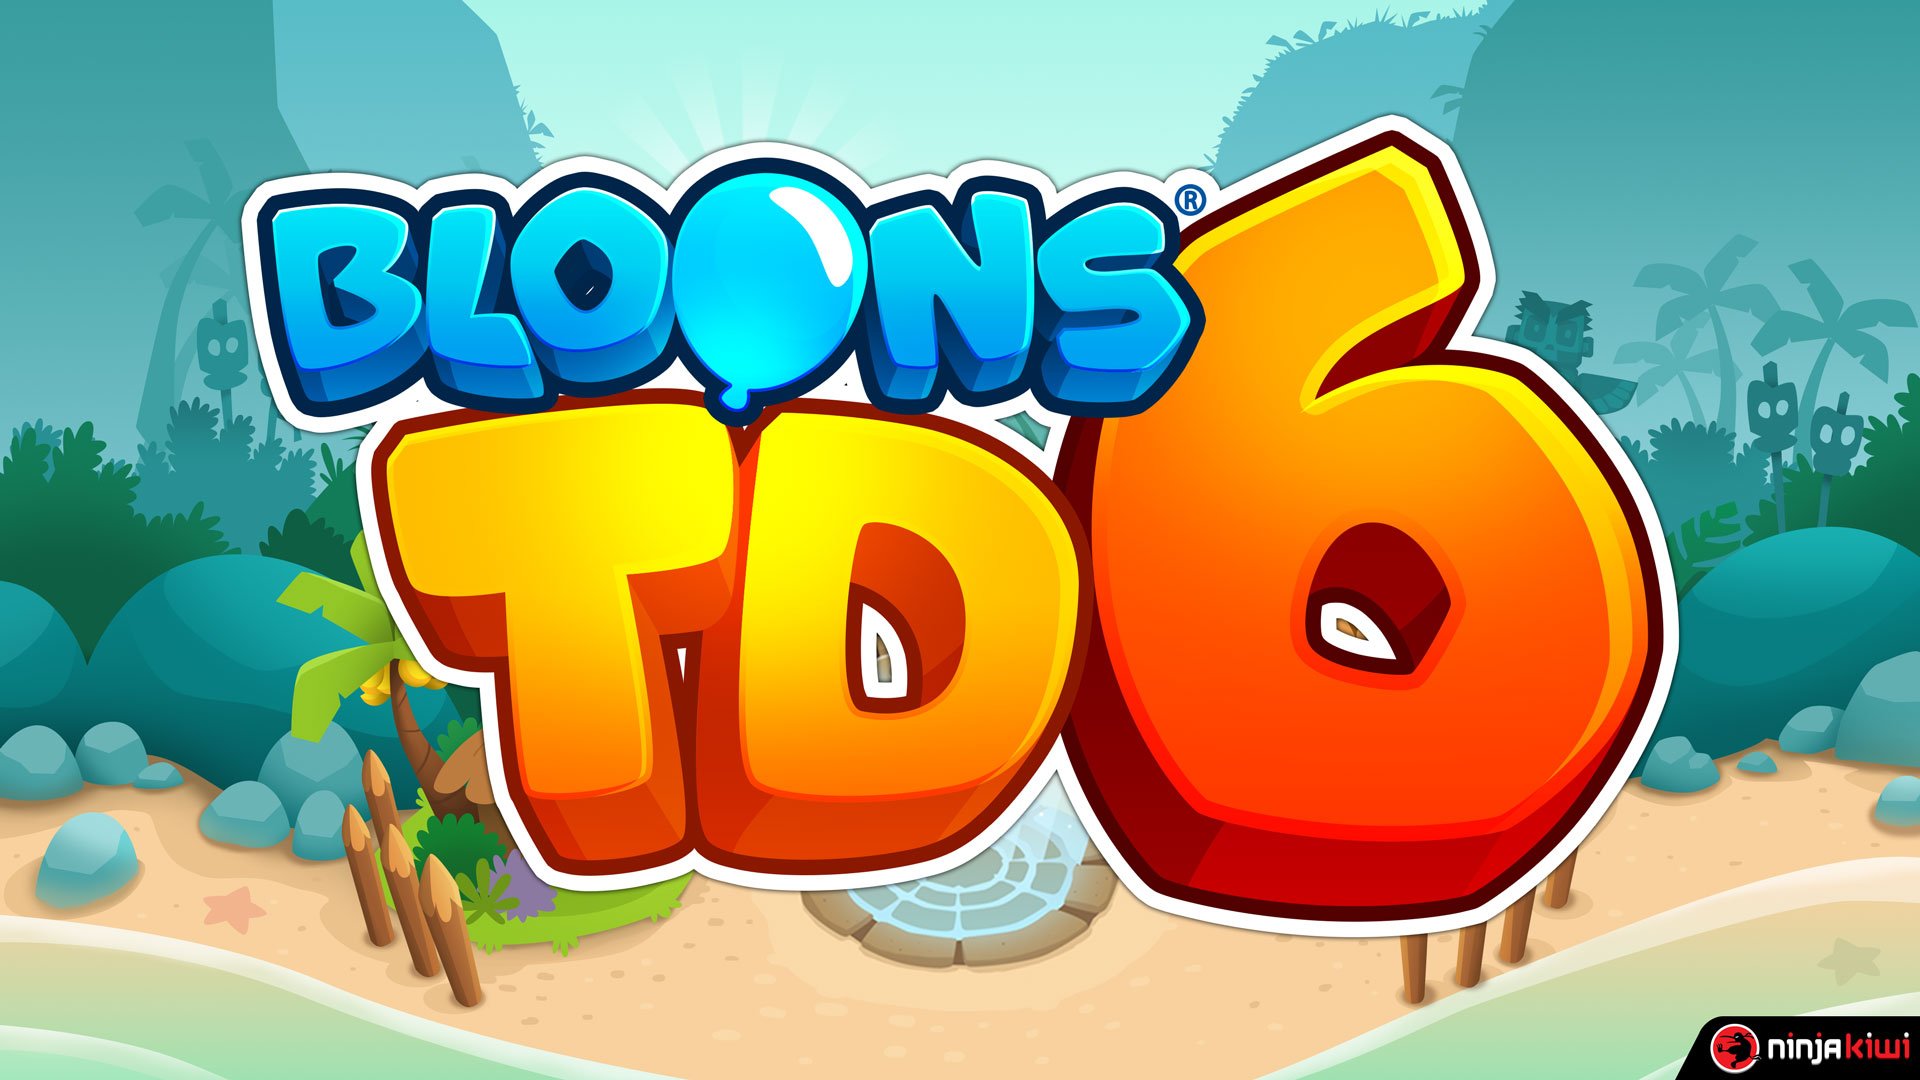 Bloons Td 6 New Update Adds 4 Player Co Op Mode Droid Gamers